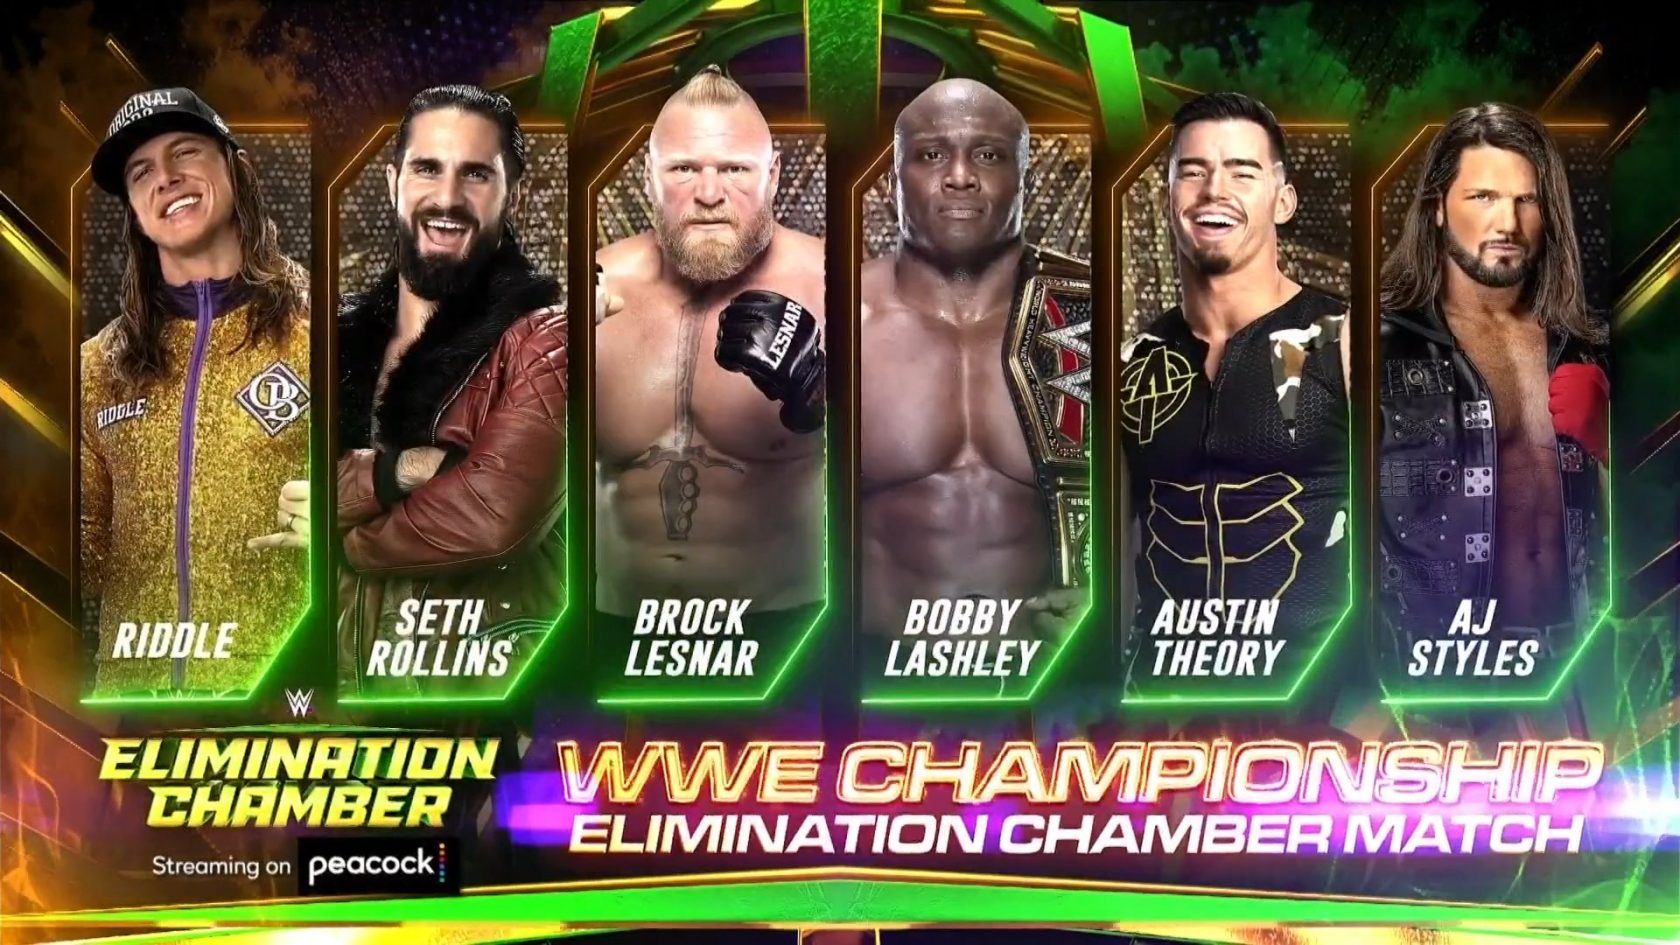 Universal Championship Match Added to WWE Elimination Chamber Event on